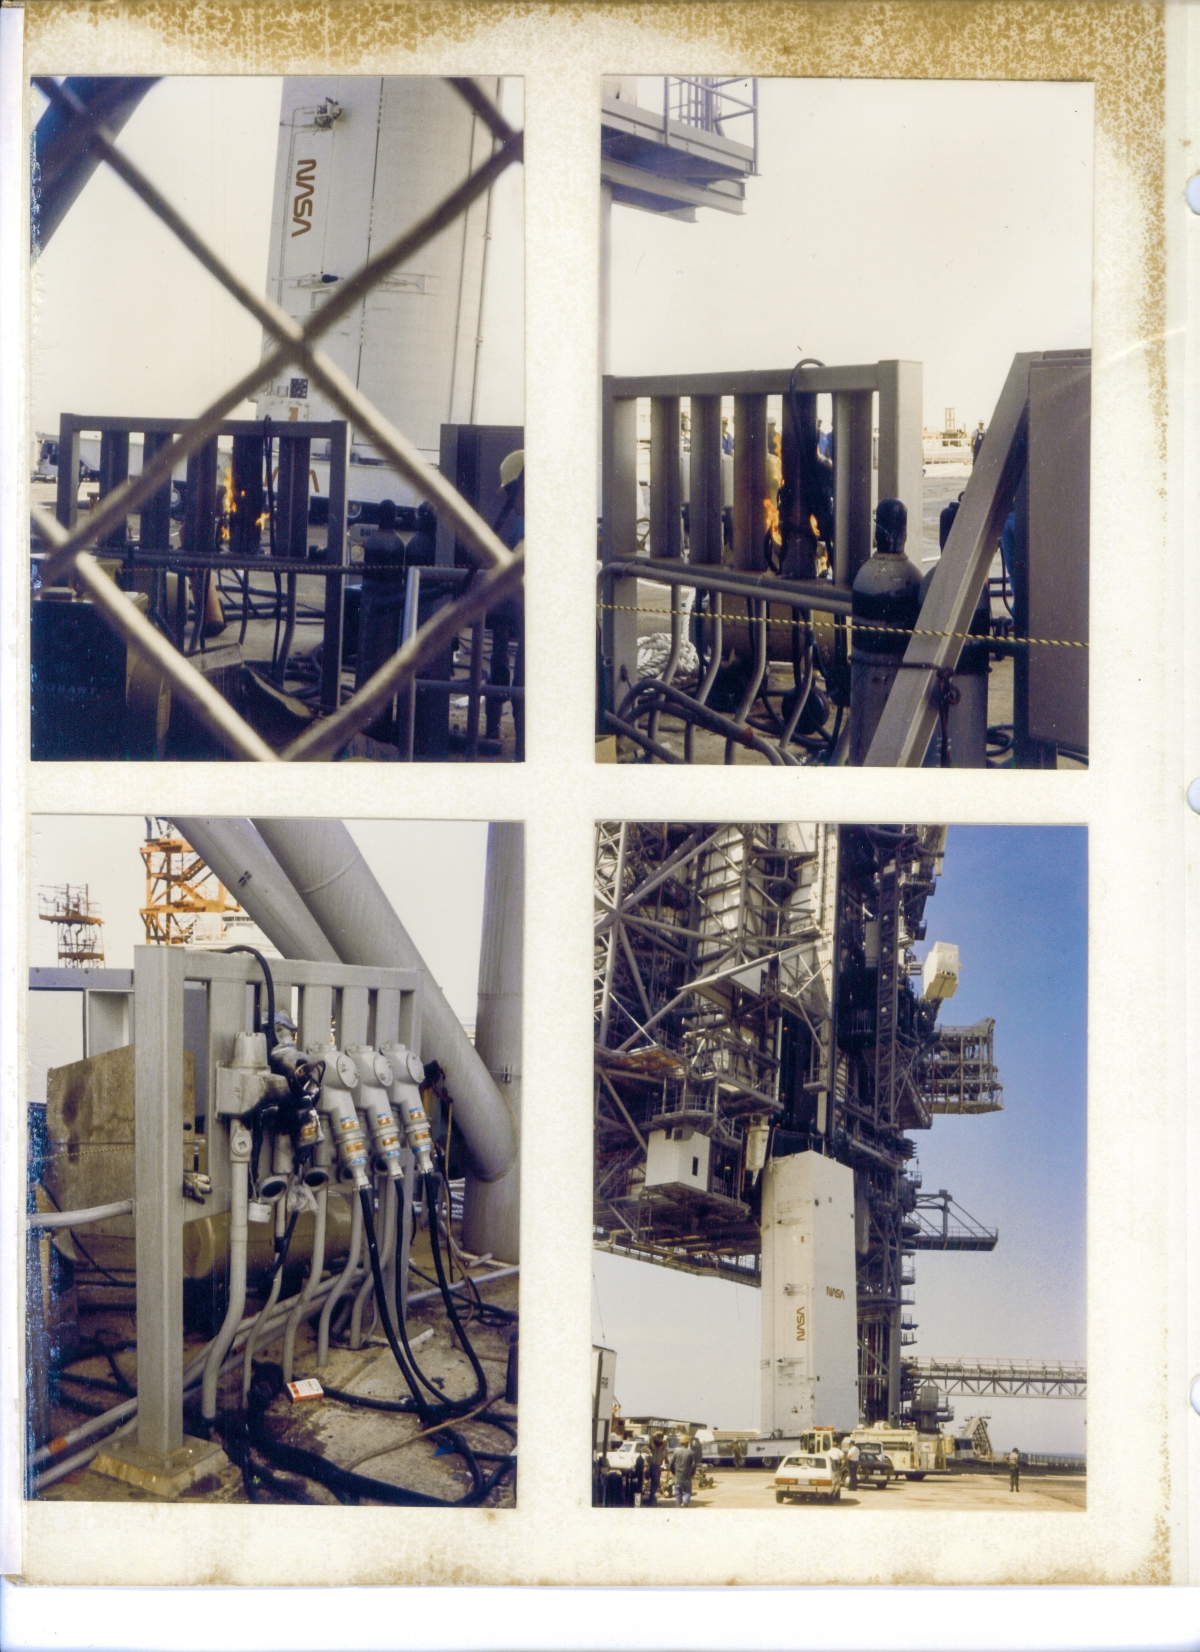 Electrical panel fire on Launch Complex 39-B, during the first Payload Canister fit-check. Fire of unknown cause, in a junction box which is located immediately in front of the elevator doors on the FSS at the pad deck level.